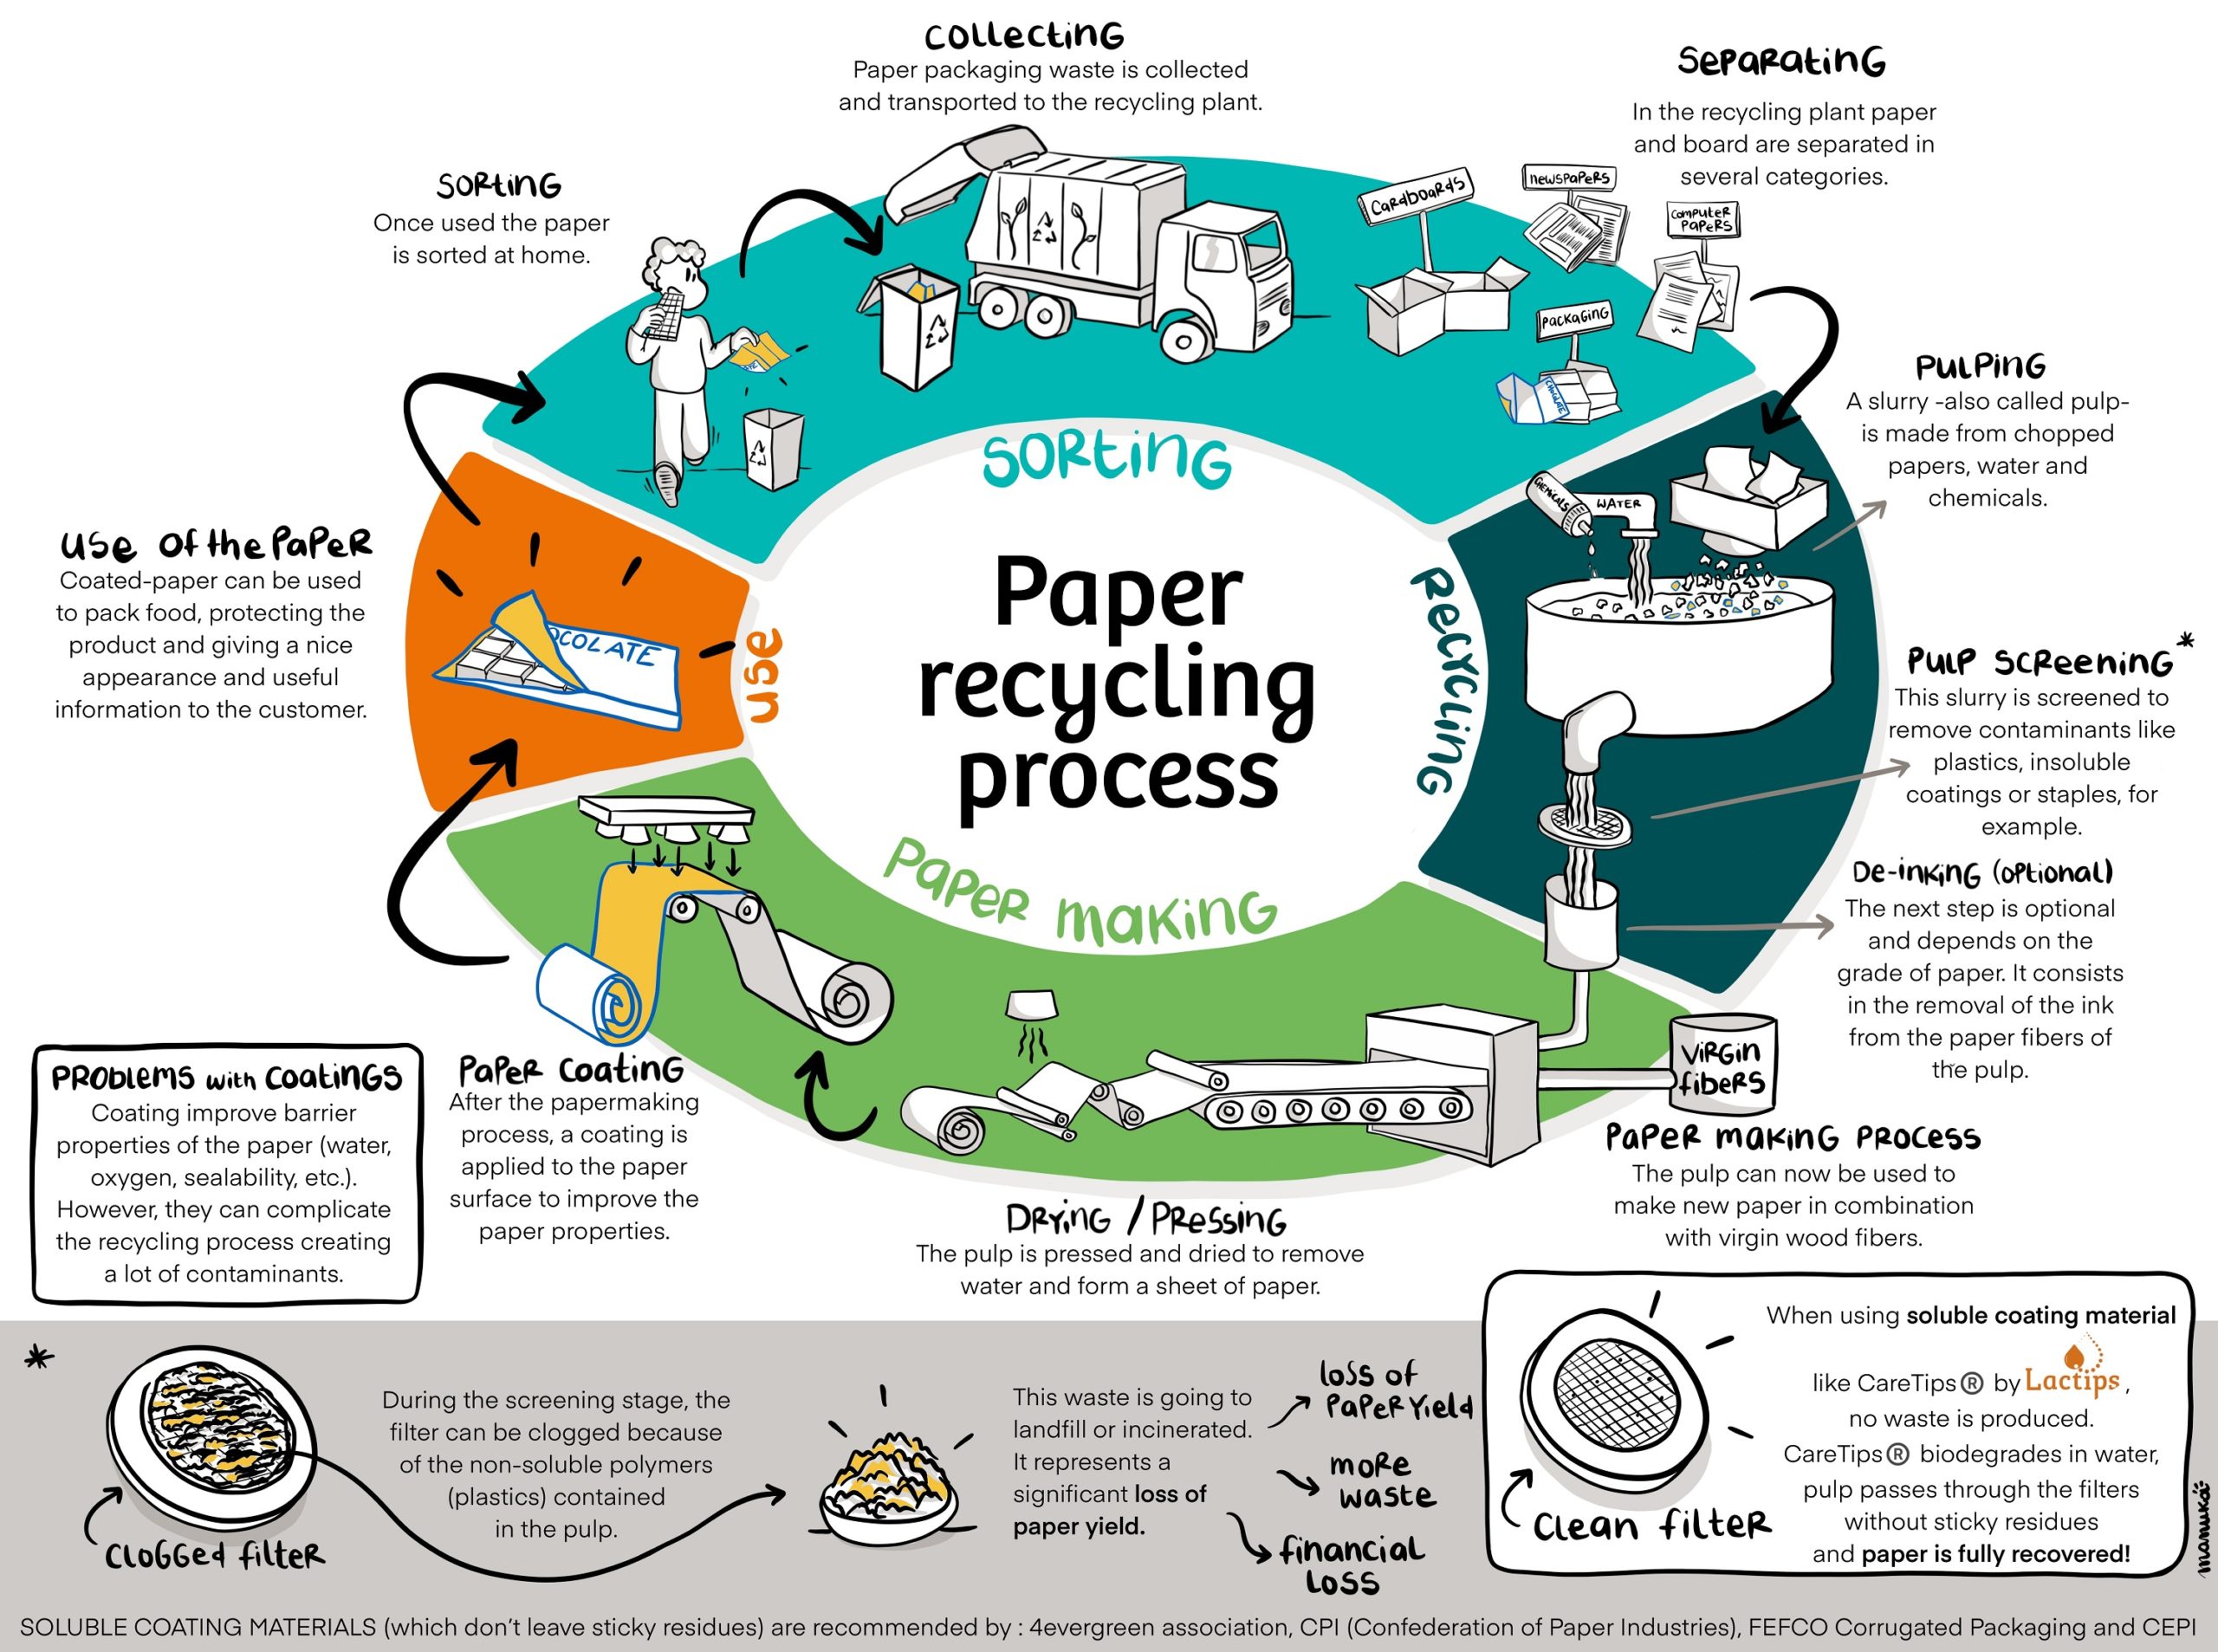 https://www.lactips.com/wp-content/uploads/2022/04/paper-recycling-process_20220407-comp-scaled.jpg